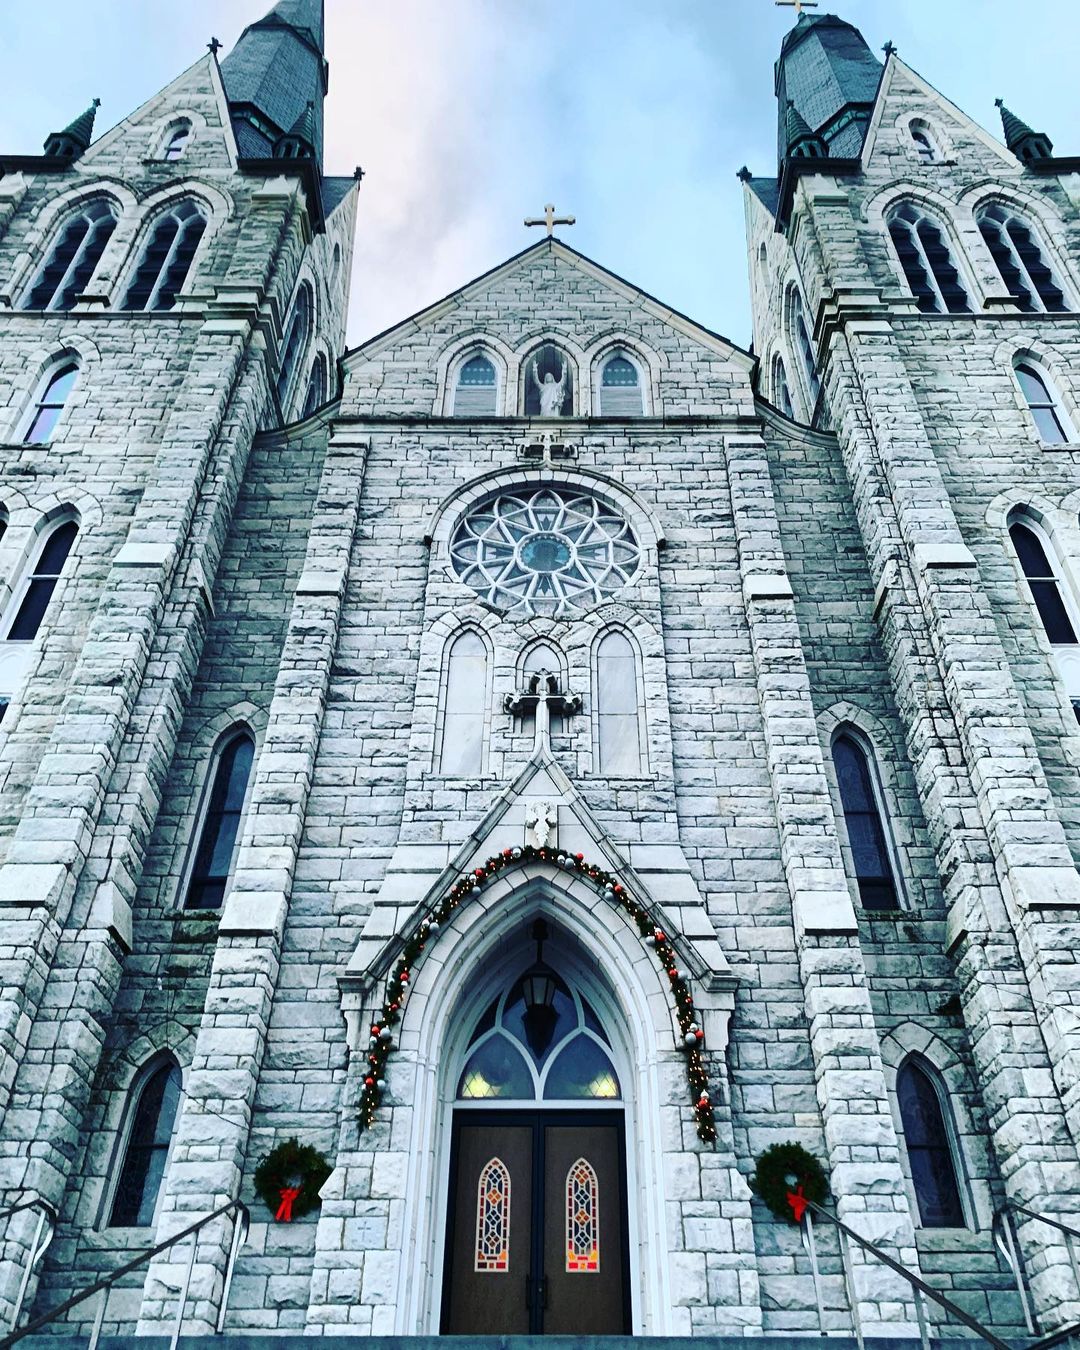 Sacred Heart Parish imposing against the sky, with garland around the entrance doorframe and a wreath on either side of the entry. Photo by Instagram user @travelwithlove.usa.